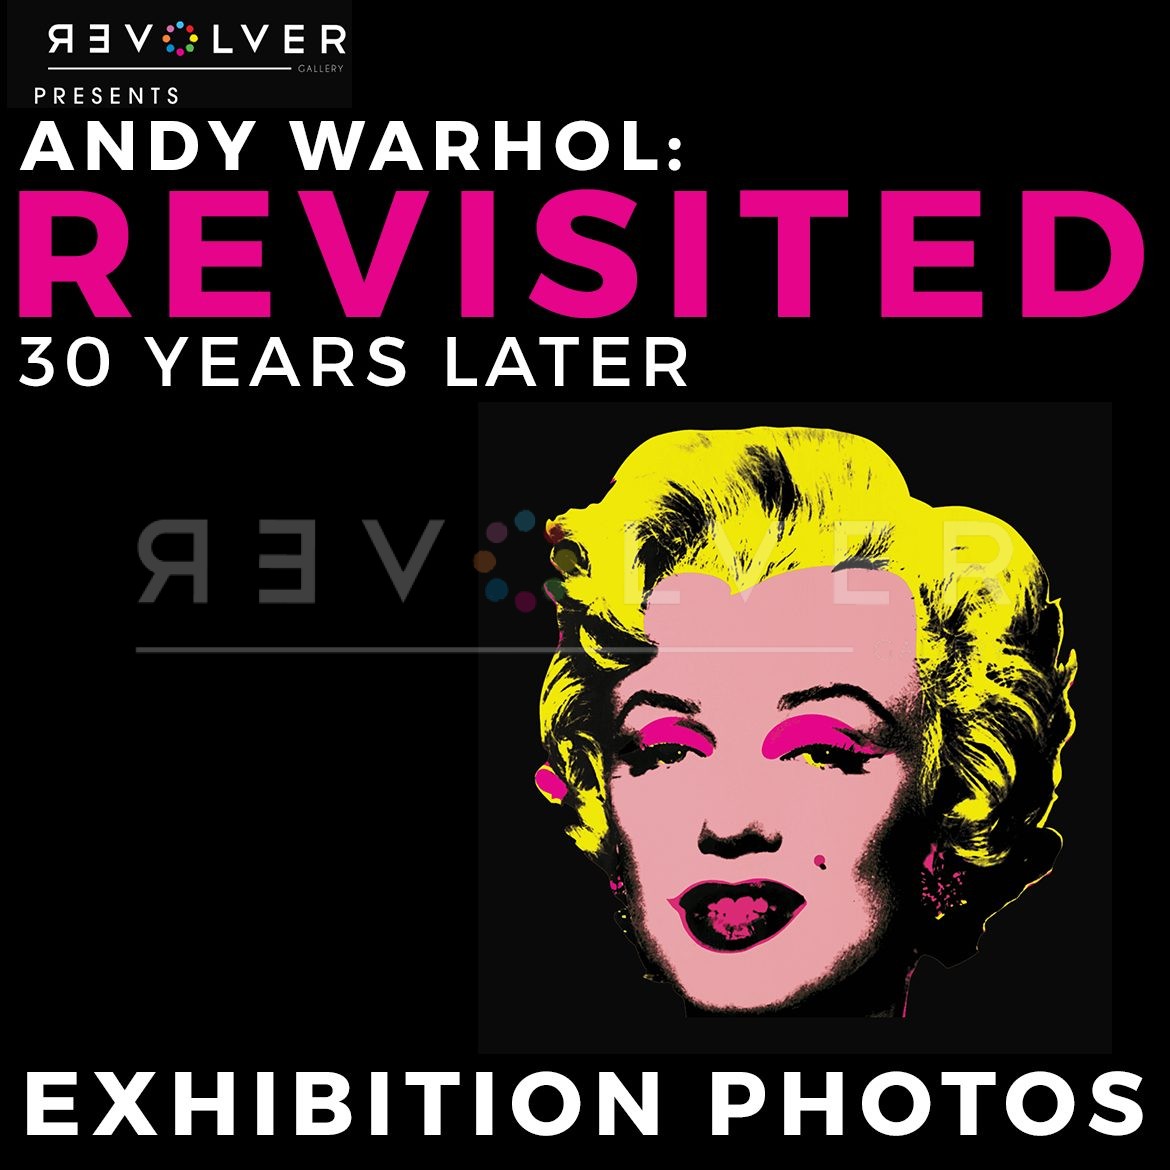 Click to view photos for Andy Warhol: Revisited exhibition on opening night.